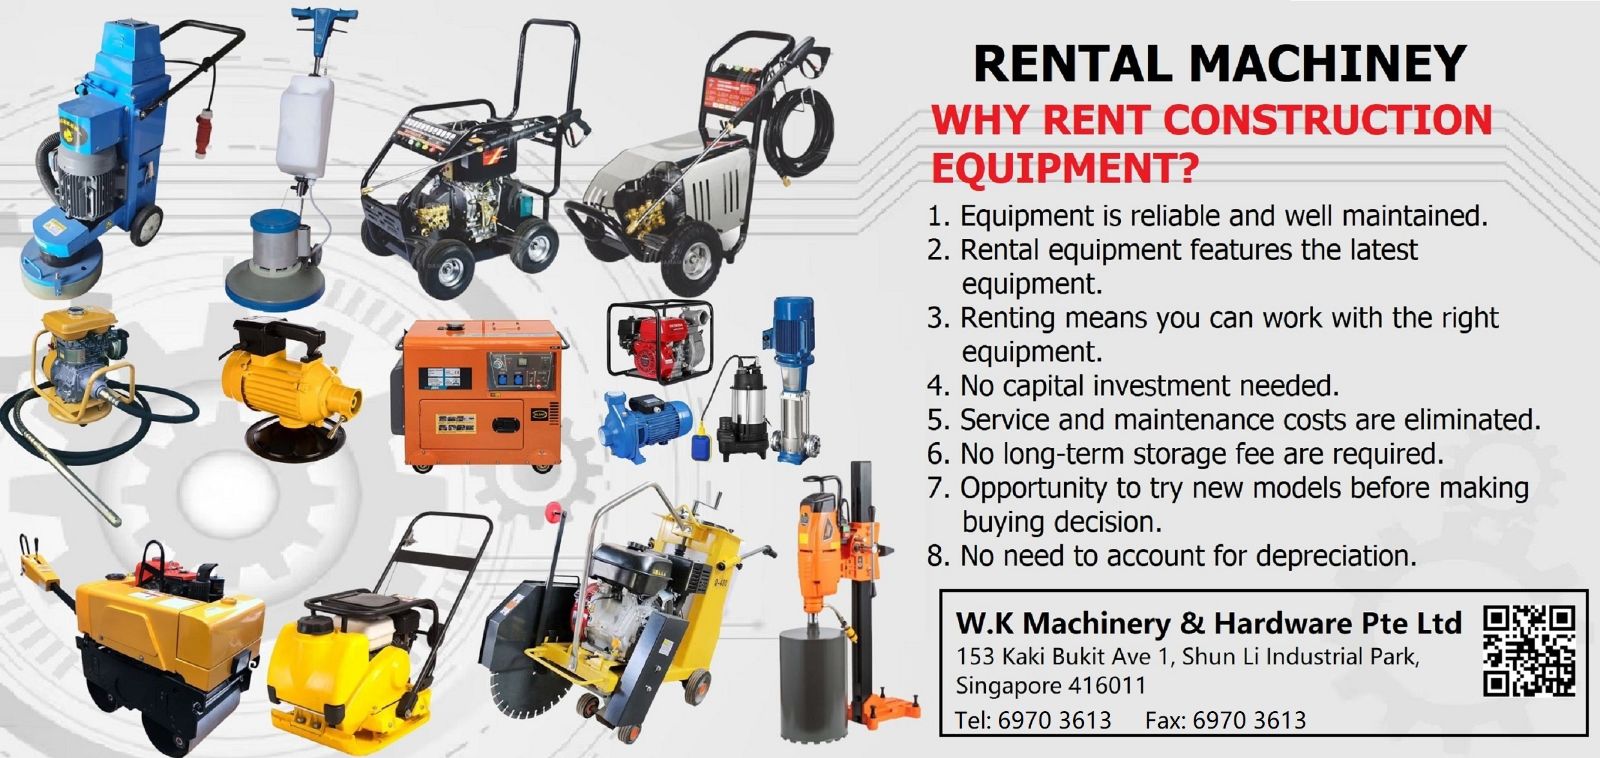 Why rent construction equipment?